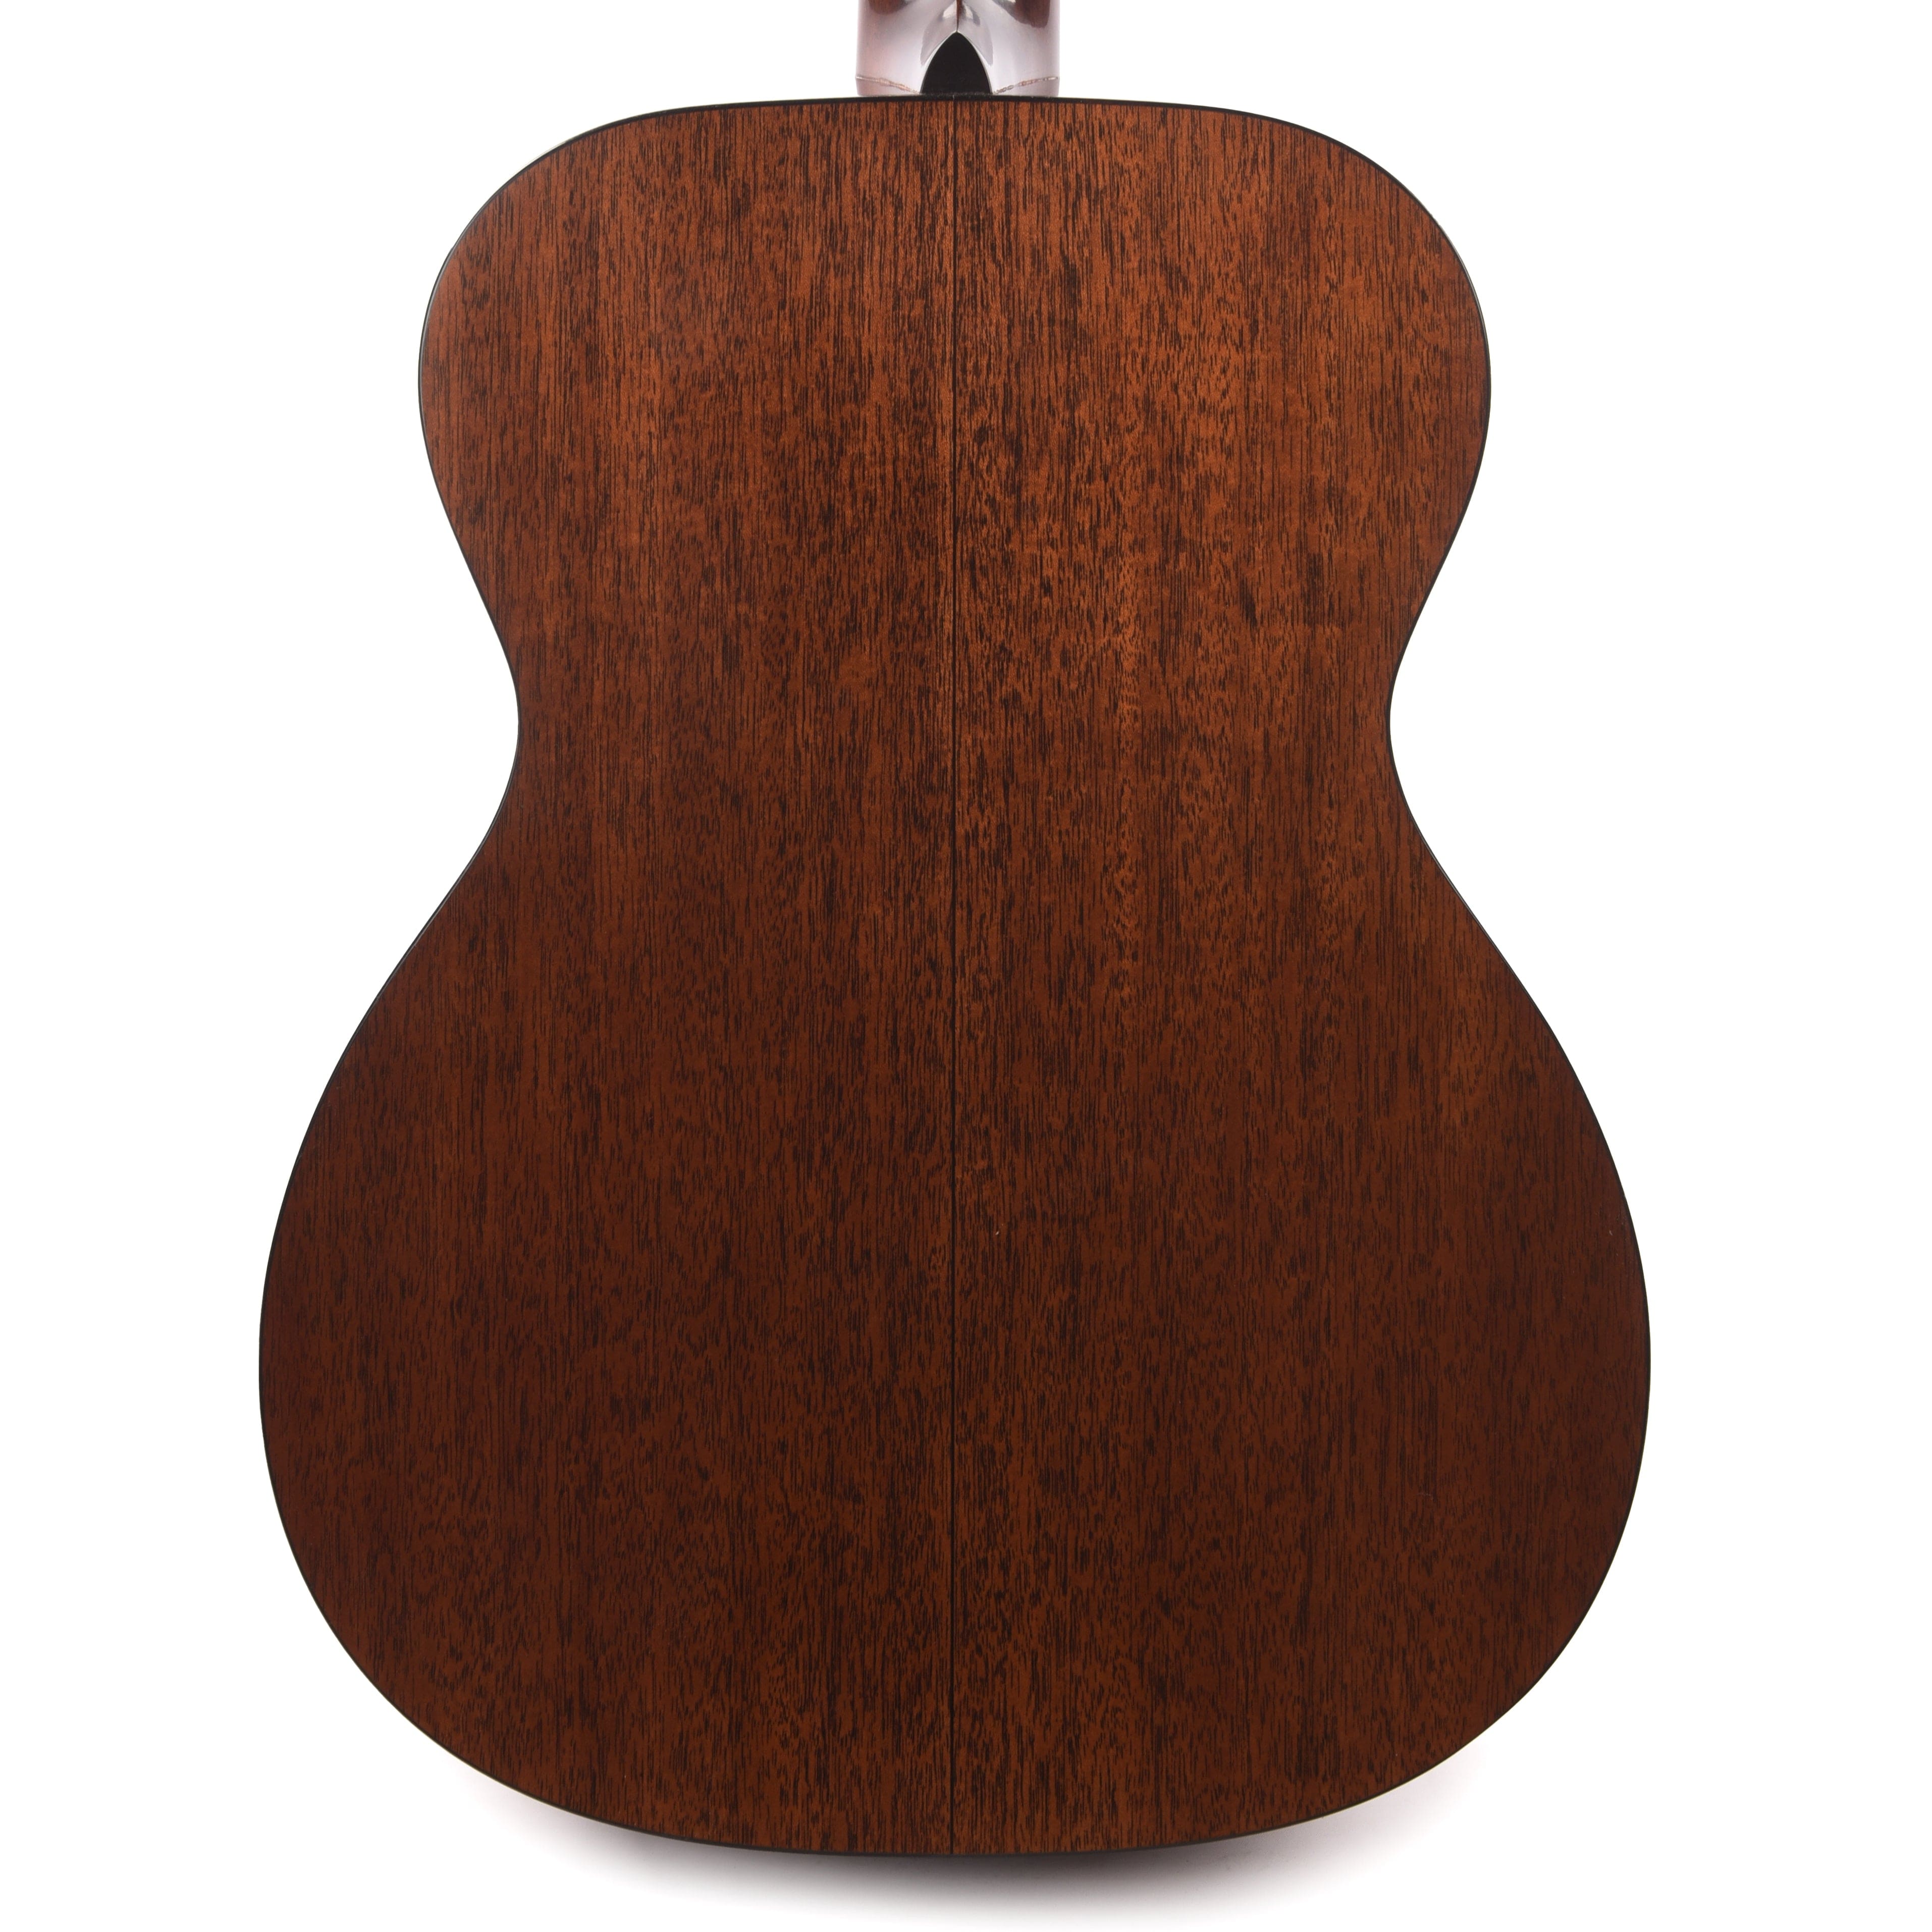 Martin Custom Shop Authentic 000-18 1937 Stage 1 Aging Adirondack Spruce/Genuine Mahogany Natural Acoustic Guitars / Dreadnought